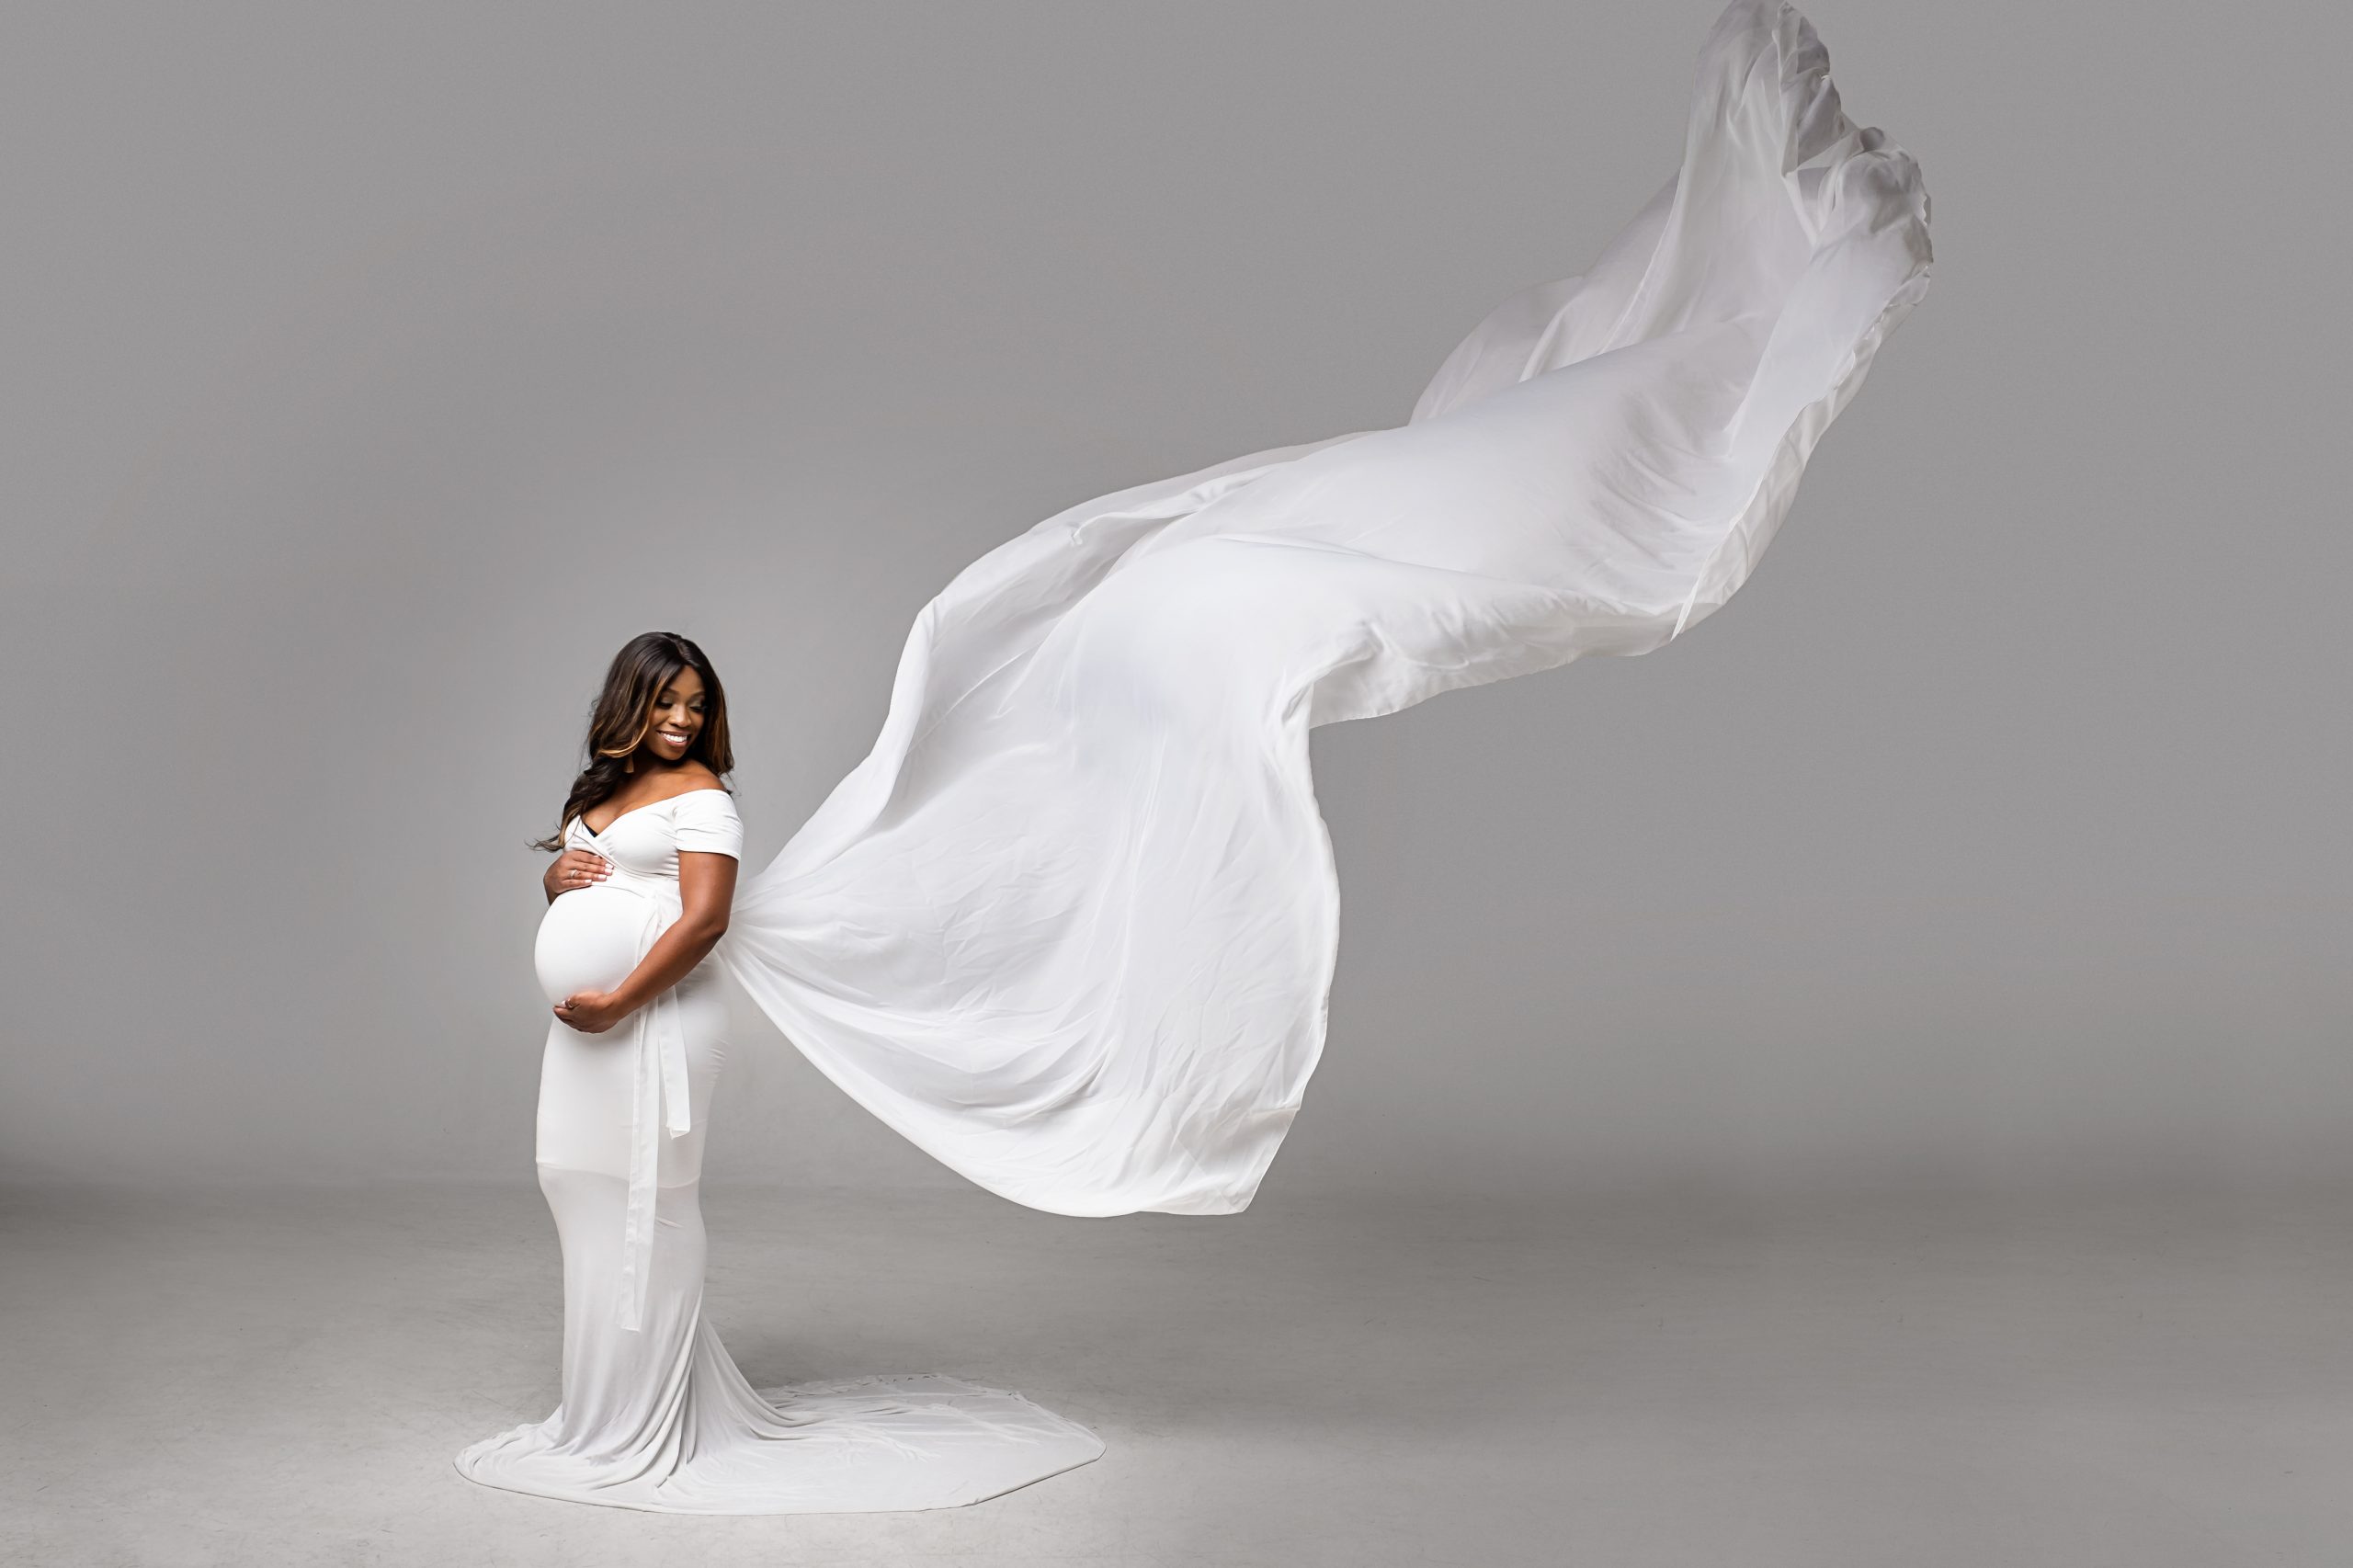 Synticee Denmark wearing white maternity long dress in heart shaped cleavage